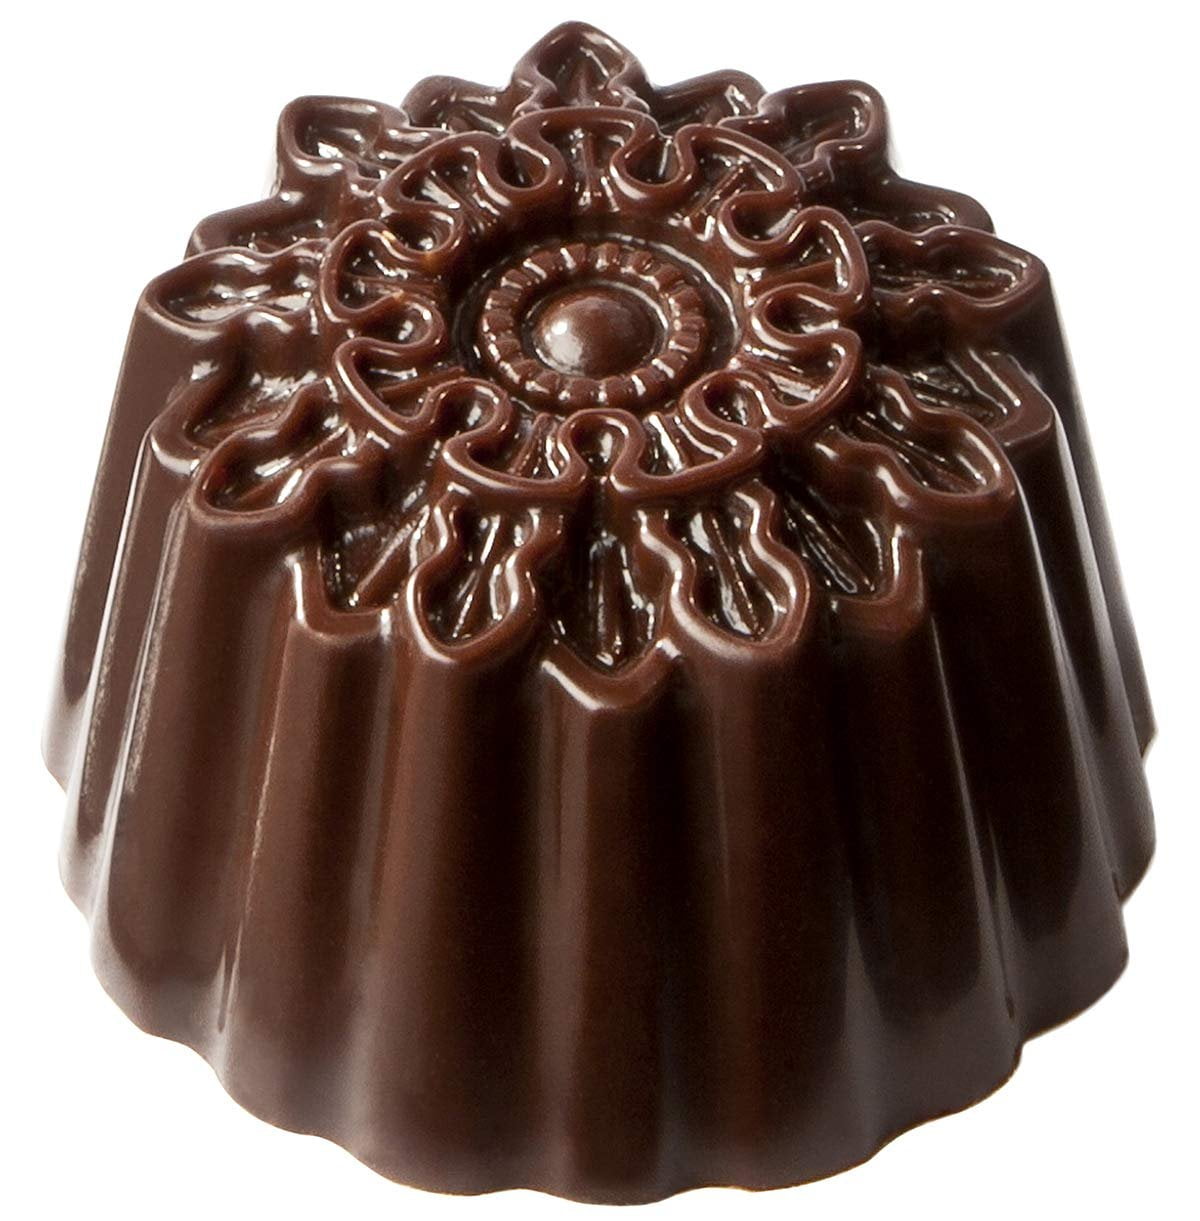 Wide Range of Chocolate Candy Moulds